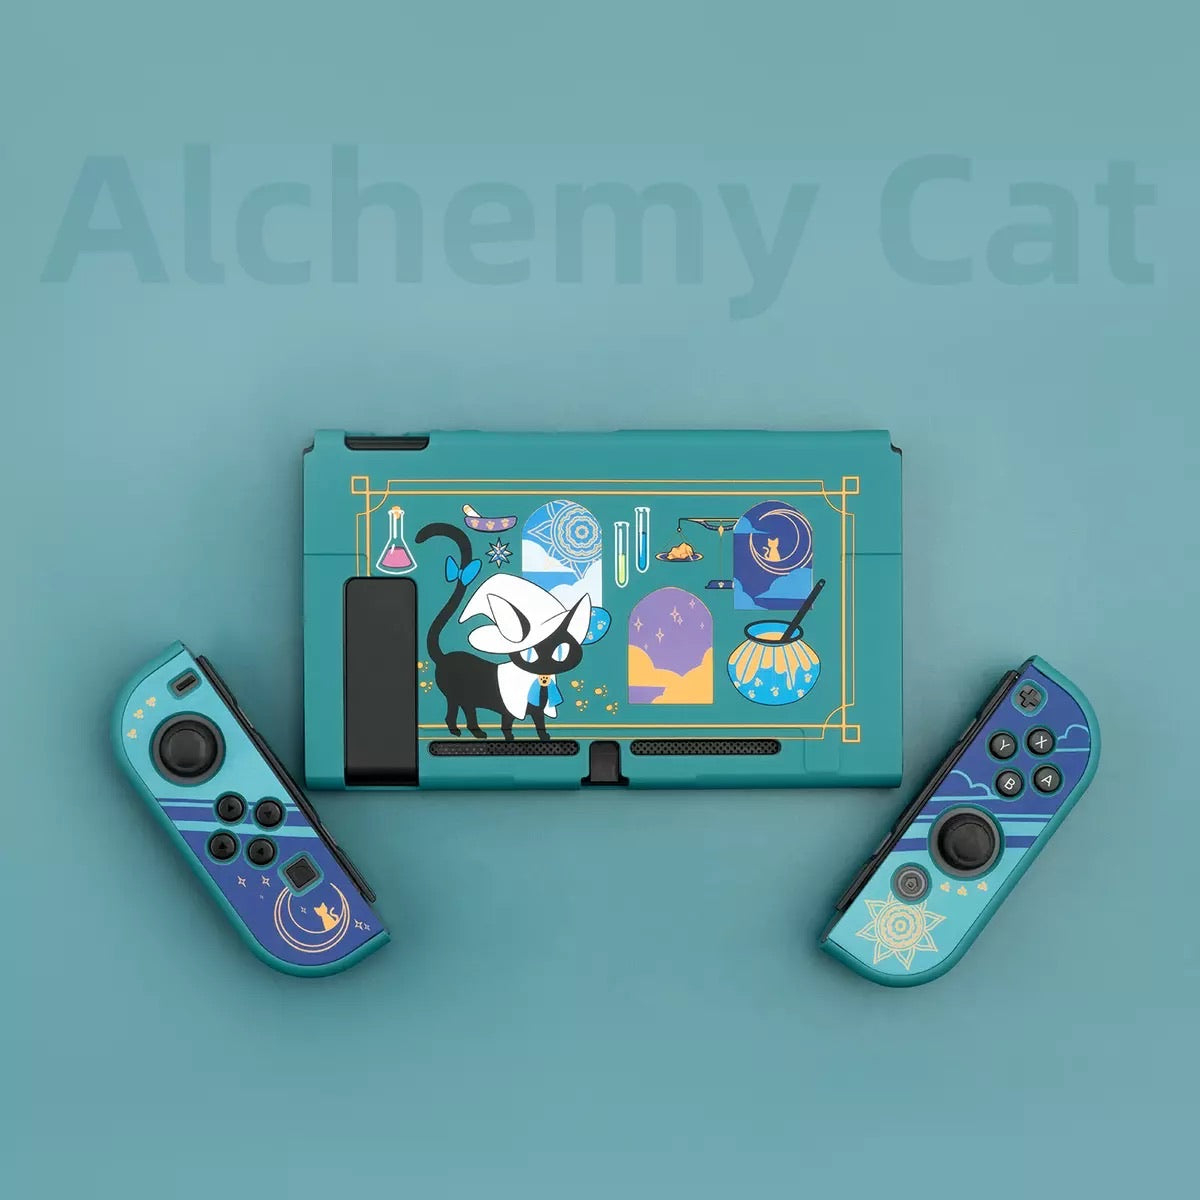 Dark Green Alchemy Cat Pastel colors__Nintendo Switch Protection Casing Cover